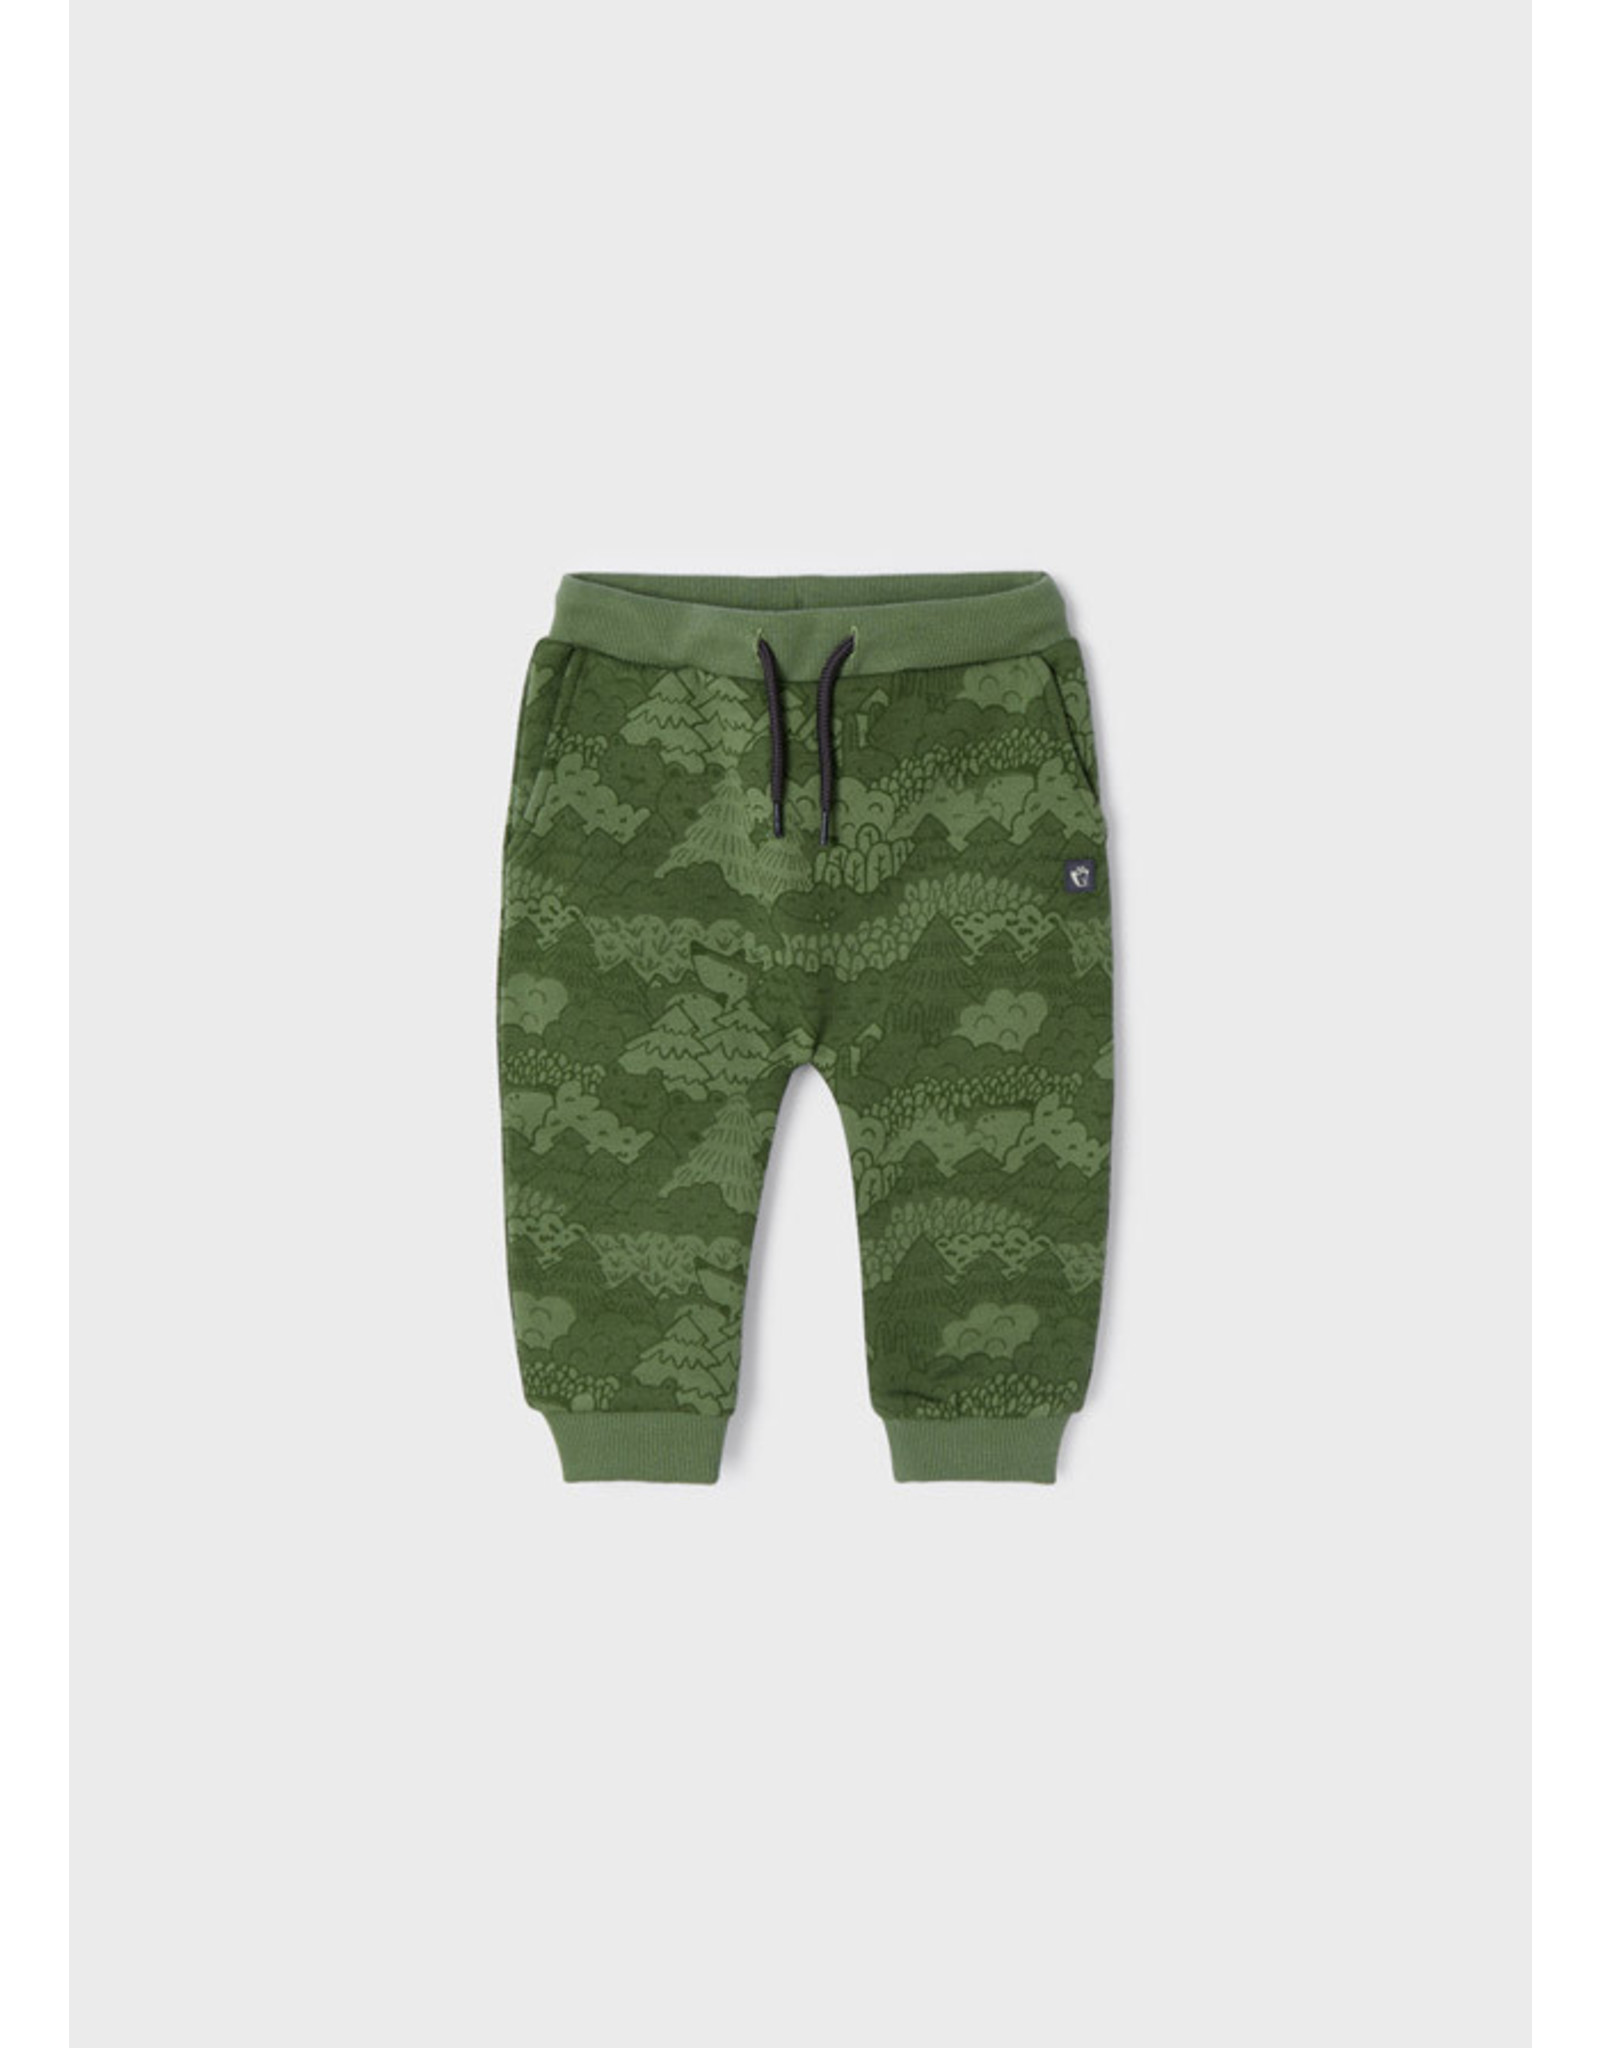 Mayoral Moss Green Forest Print Pants